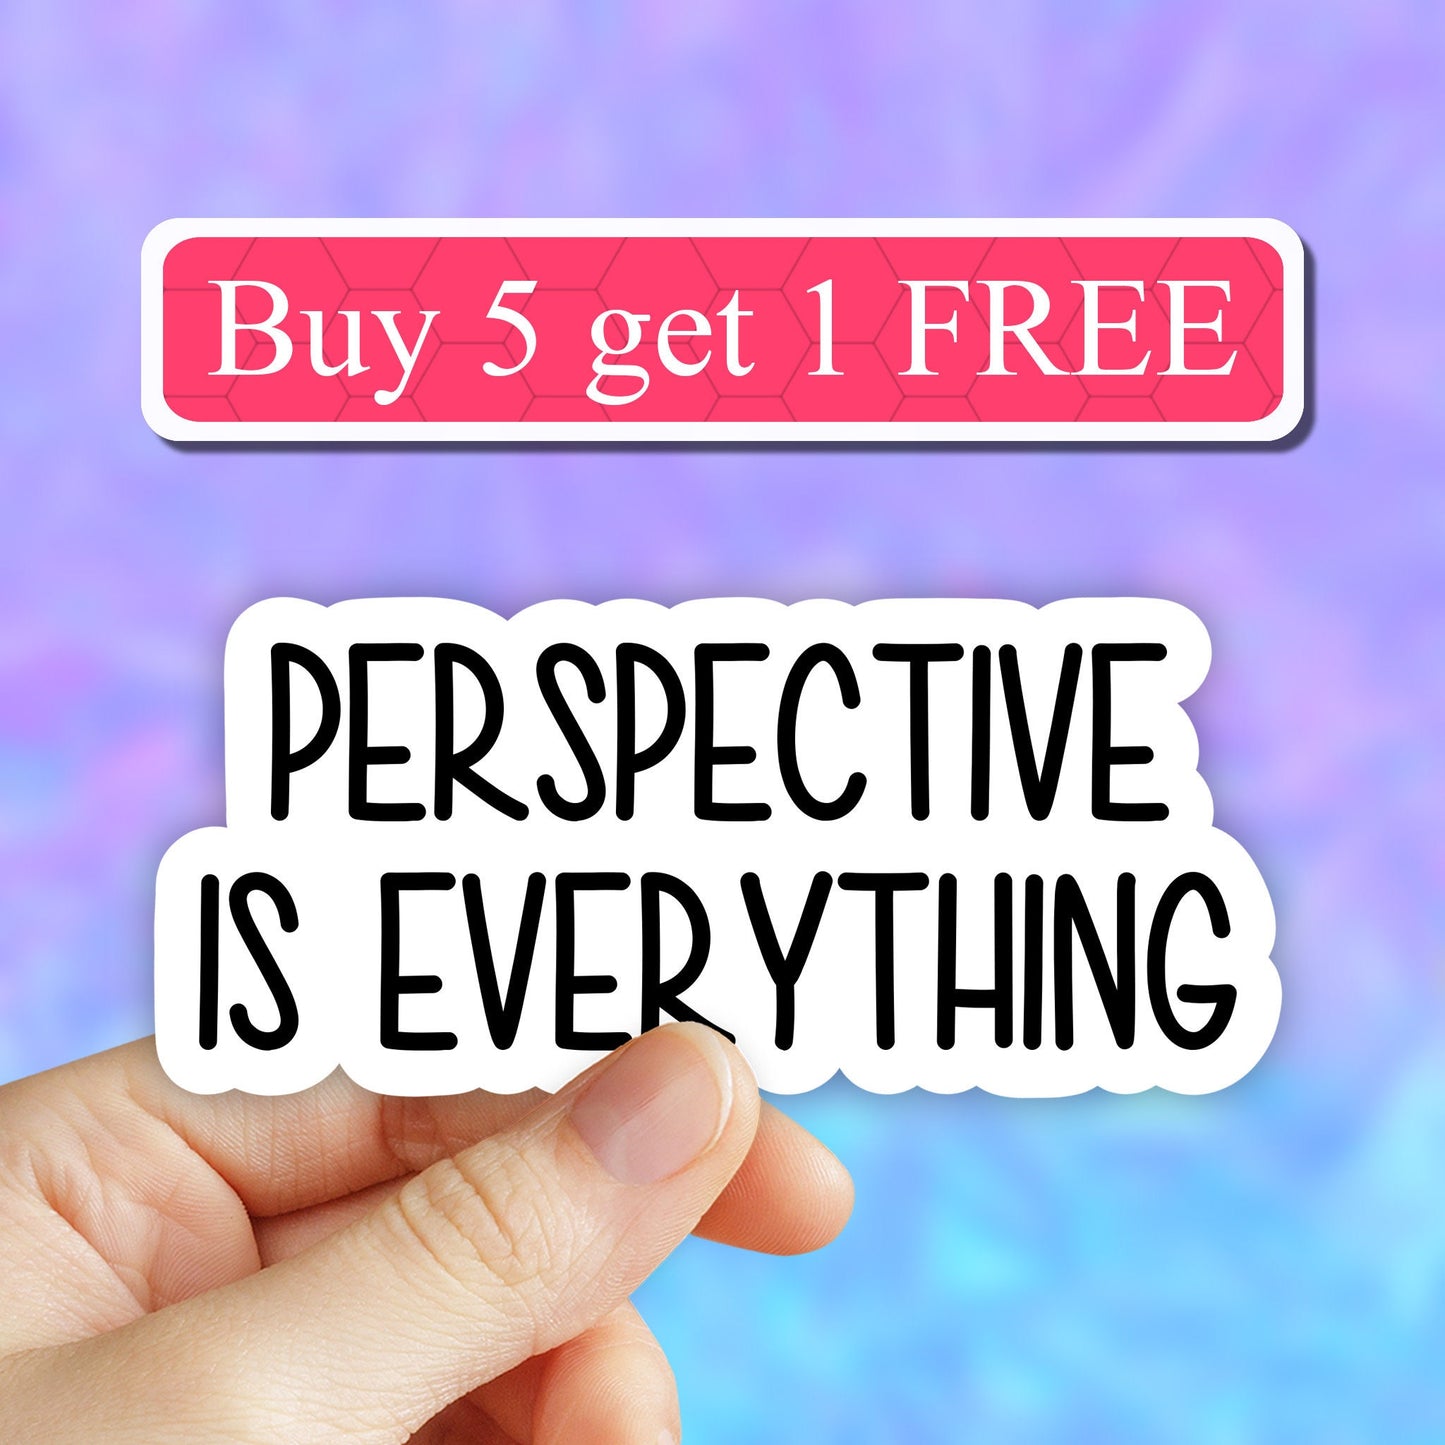 Perspective is everything sticker, kindness stickers, motivational be kind stickers, laptop stickers, wisdom water bottle stickers, decals